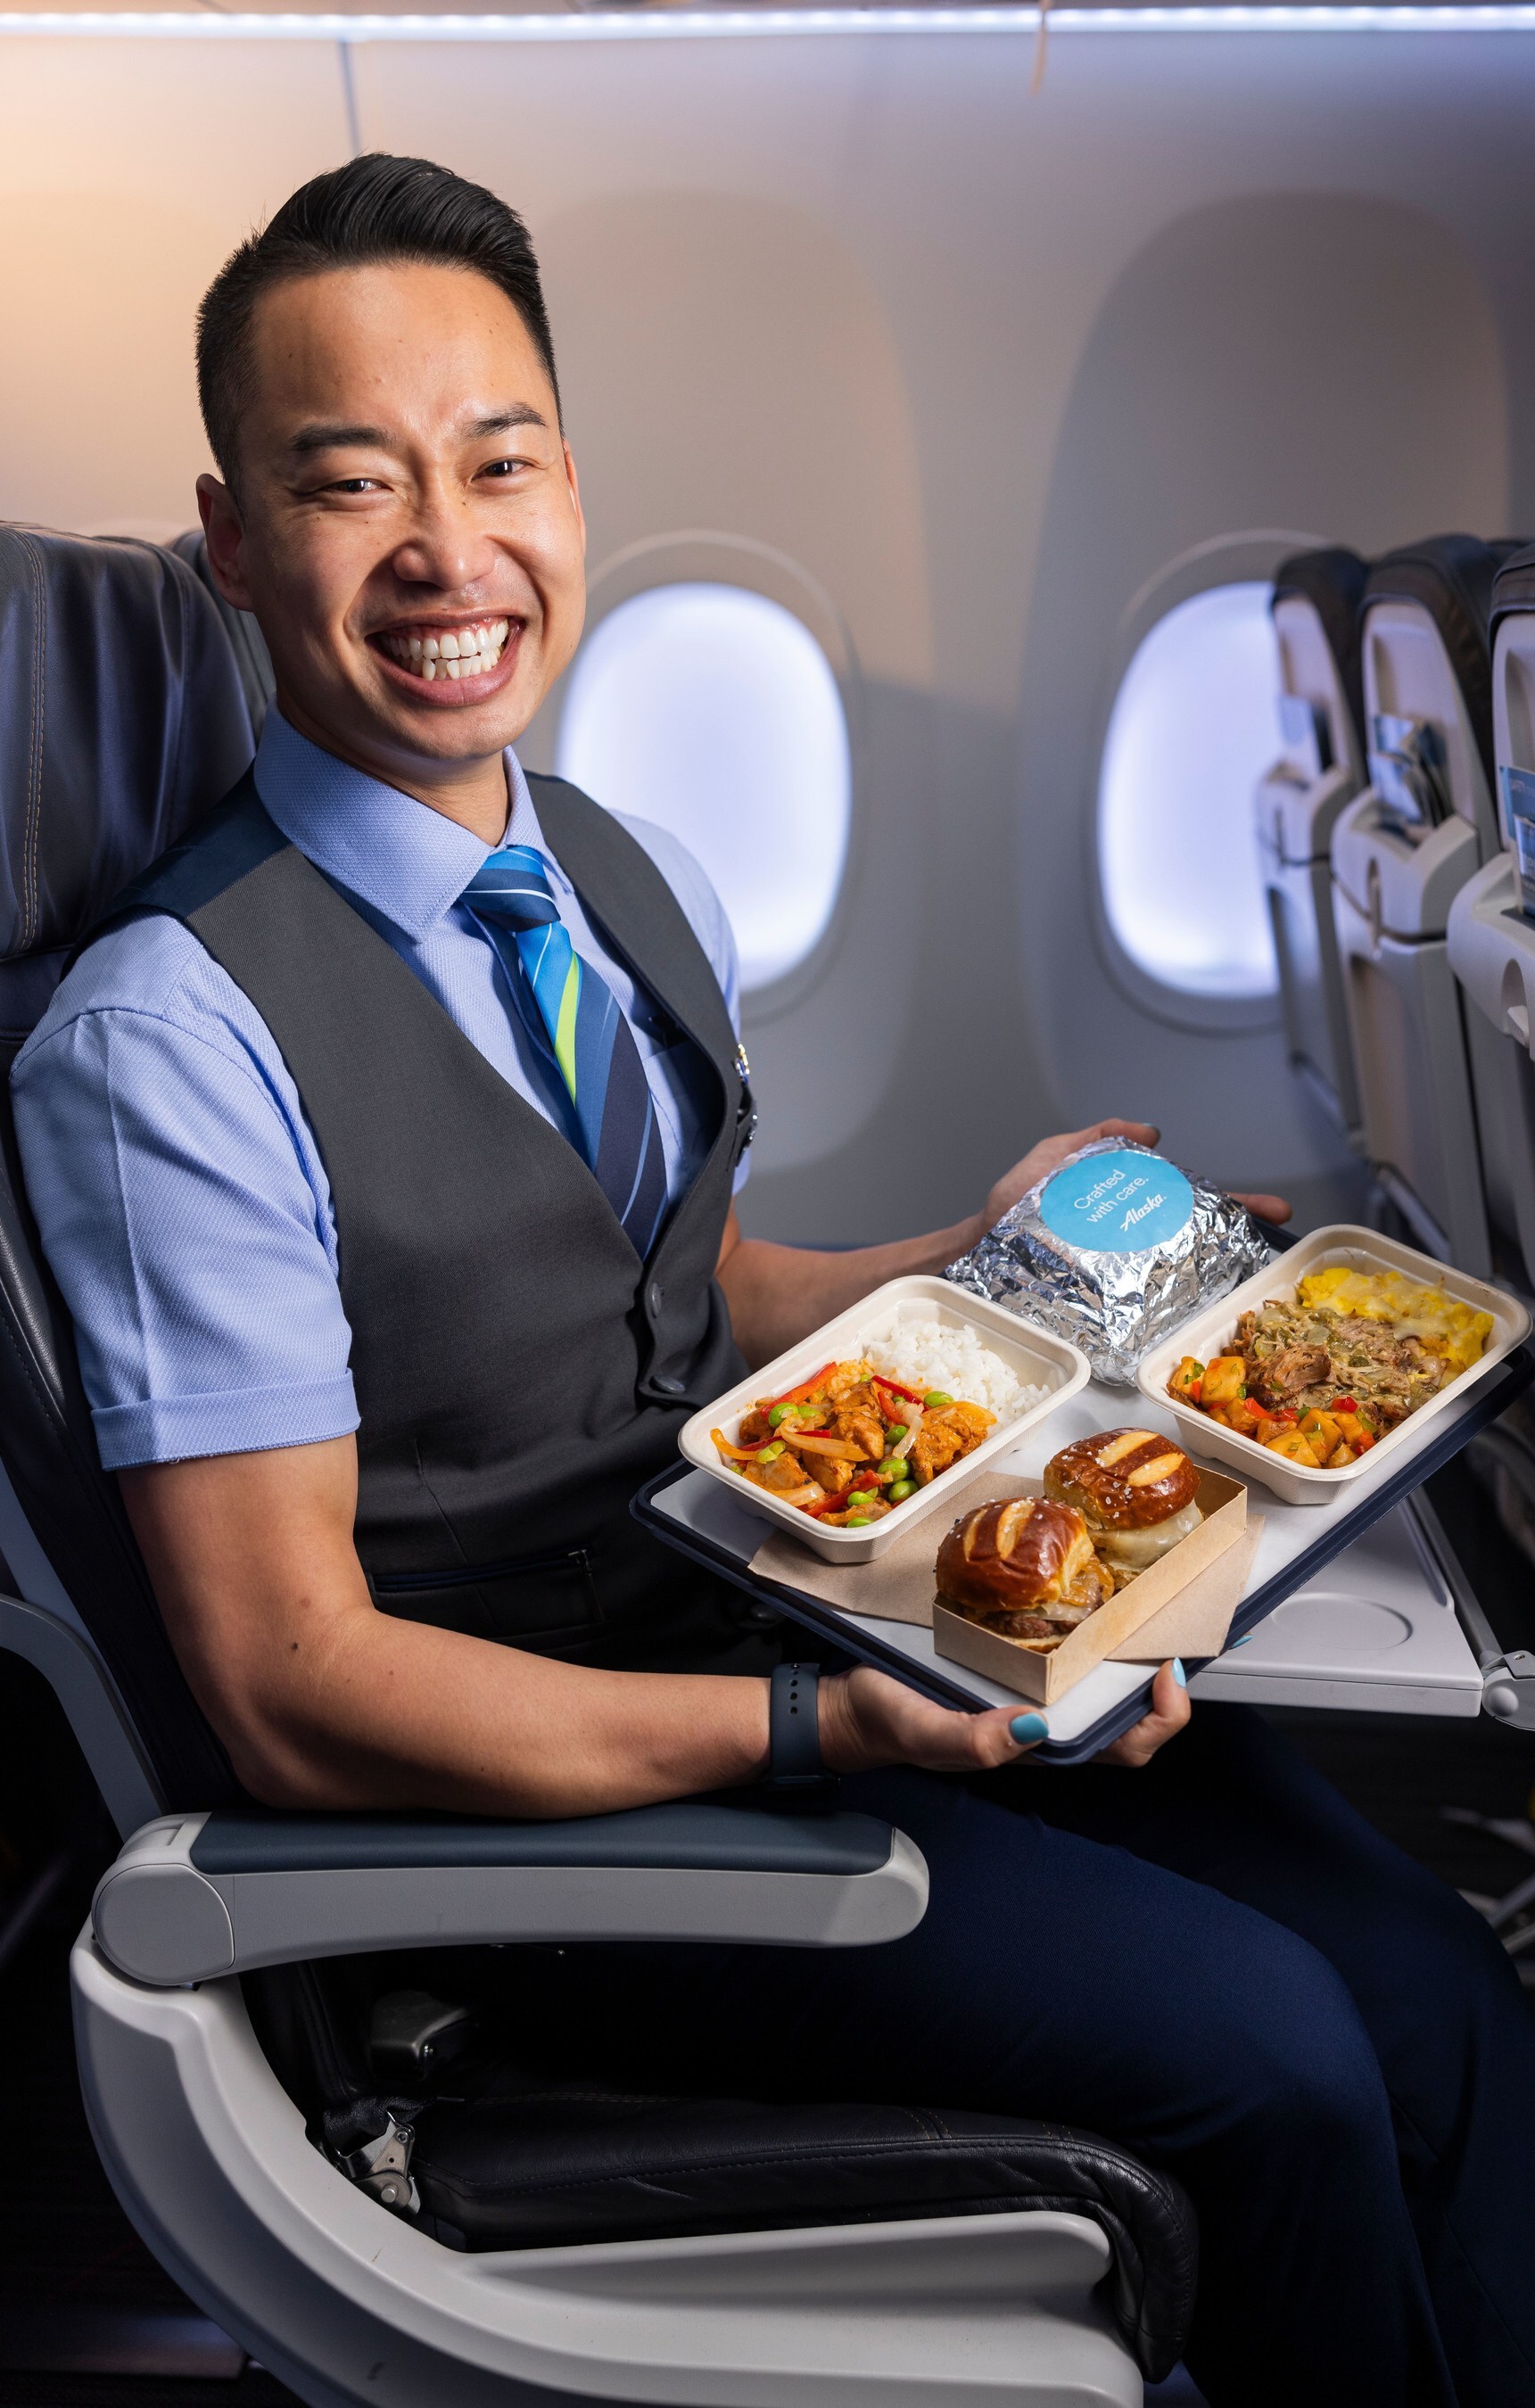 Alaska Airlines is elevating its premium onboard menu with the expansion of hot meals in its Main Cabin on most flights over 1,100 miles